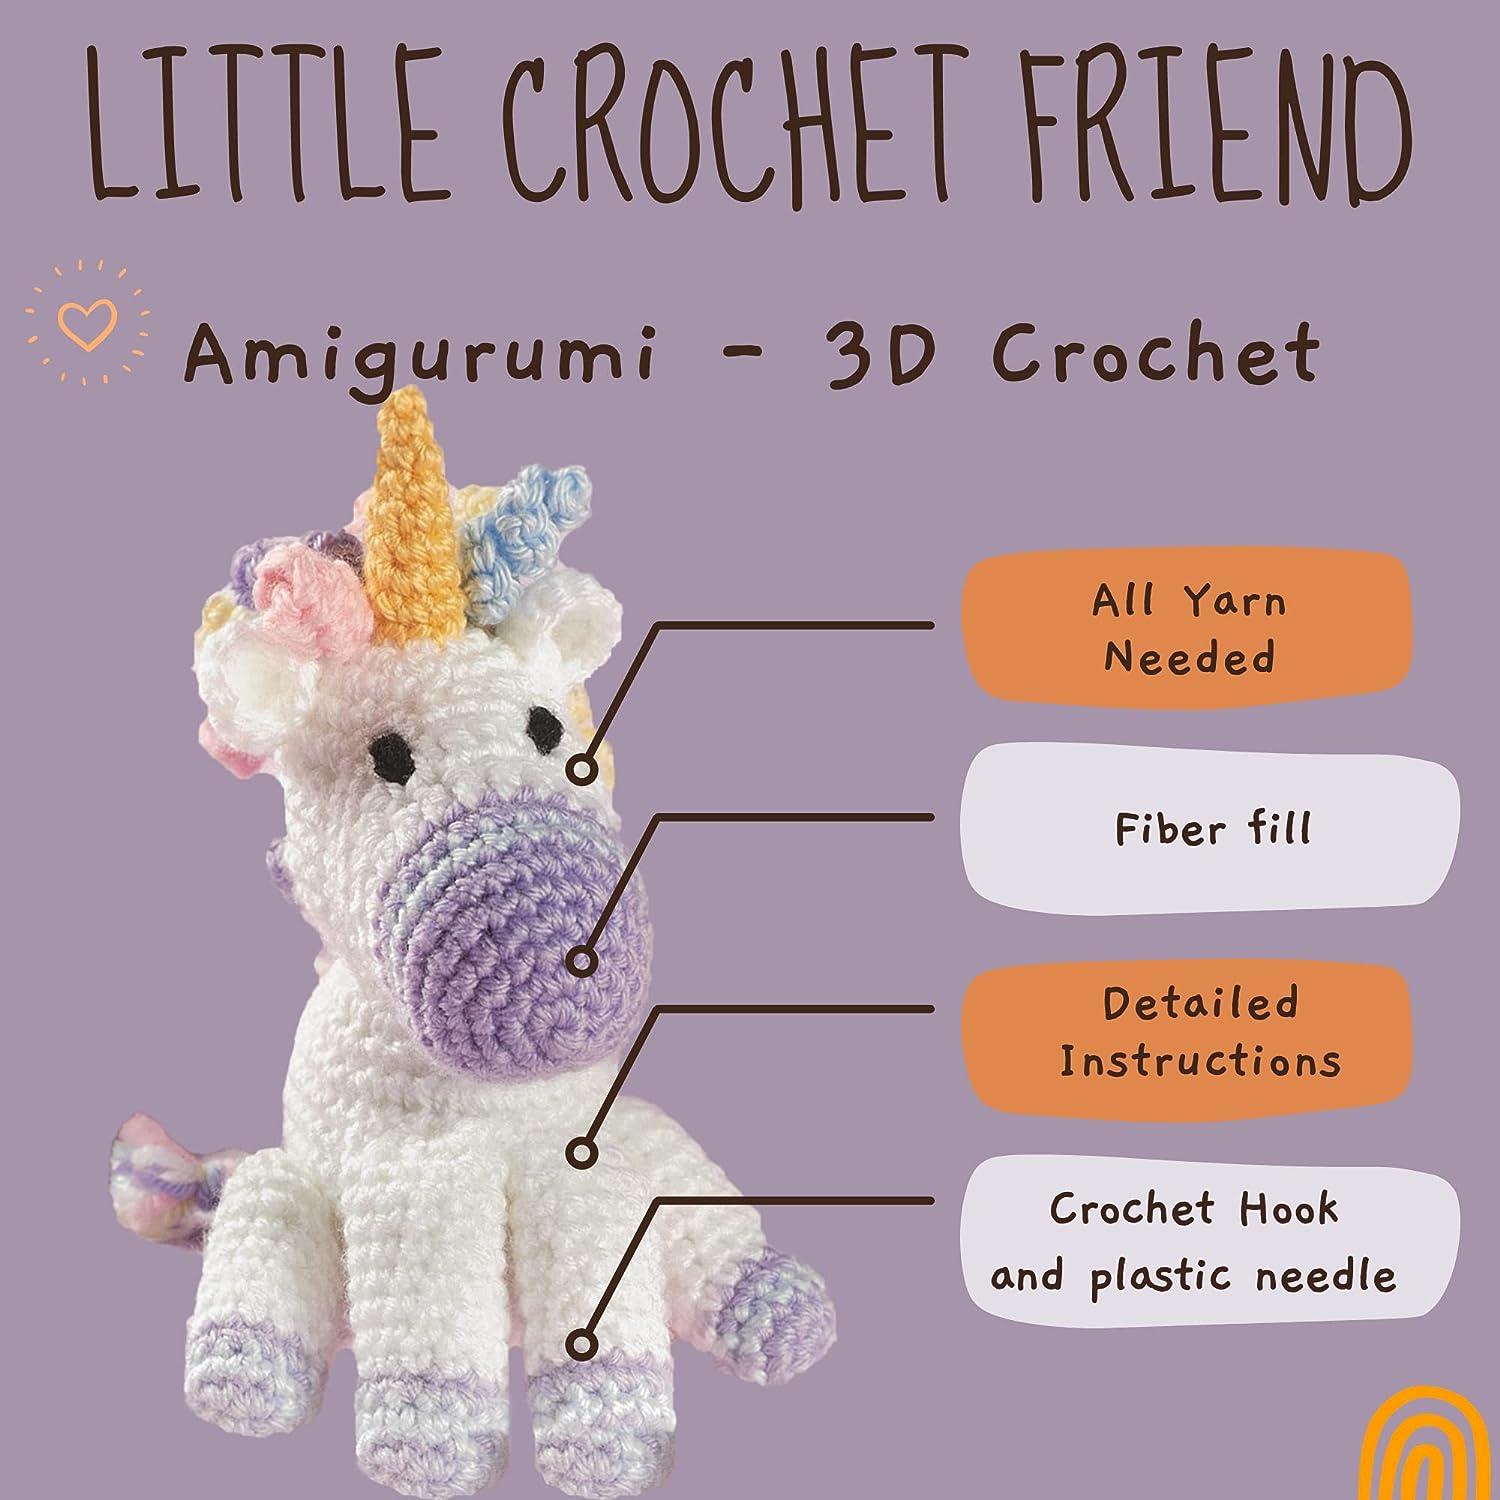 Leisure Arts Little Crochet Friend Animals Crochet Kit, Pig, 8, Complete Crochet  kit, Learn to Crochet Animal Starter kit for All Ages, Includes  Instructions, DIY amigurumi Crochet Kits 